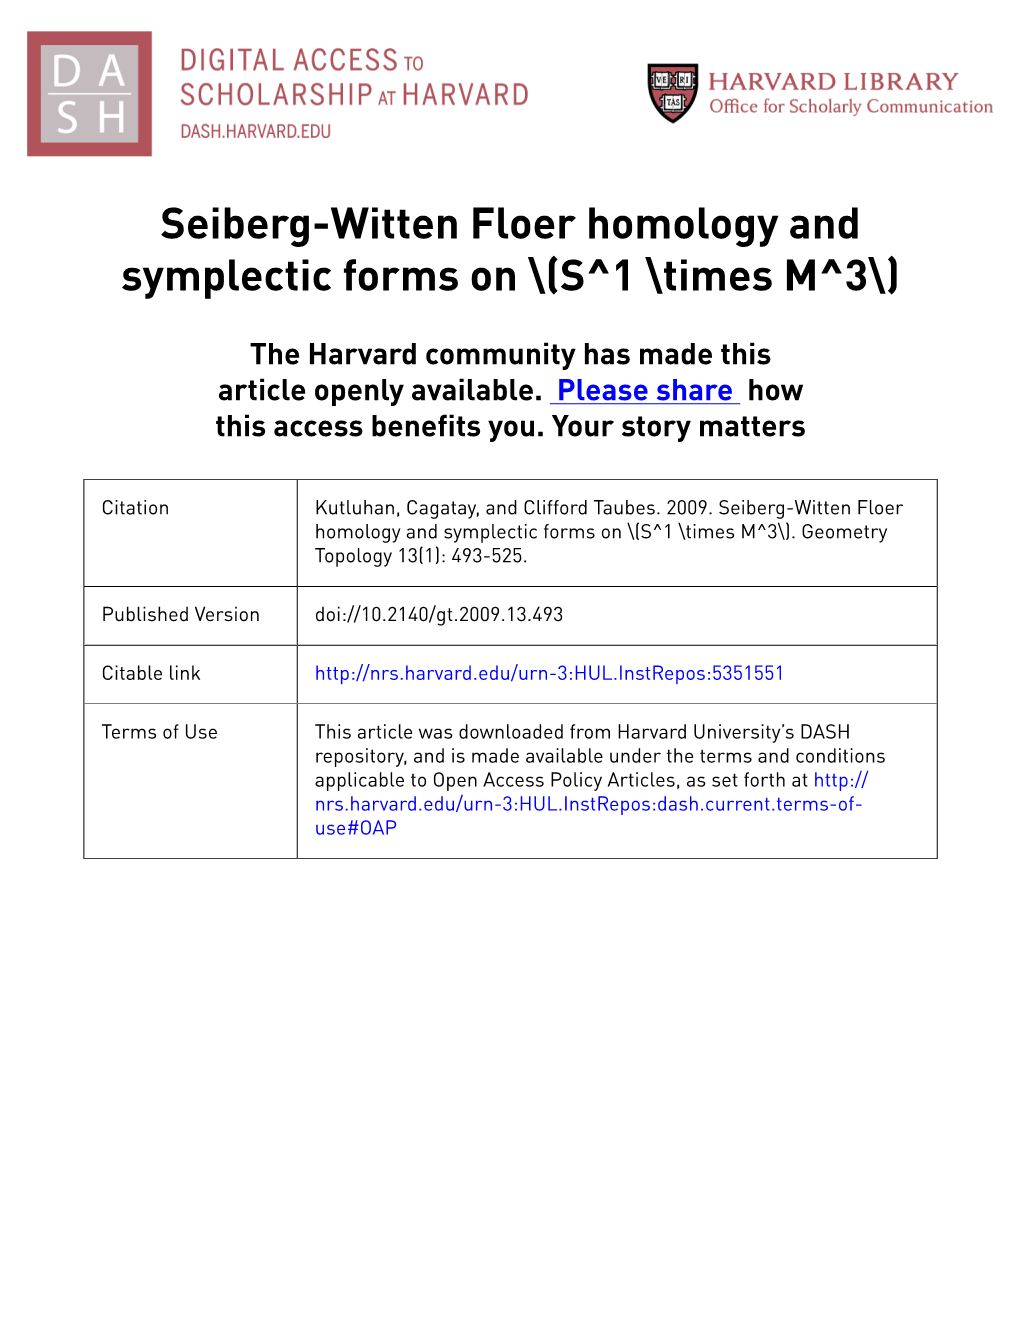 Seiberg-Witten Floer Homology and Symplectic Forms on \(S^1 \Times M^3\)